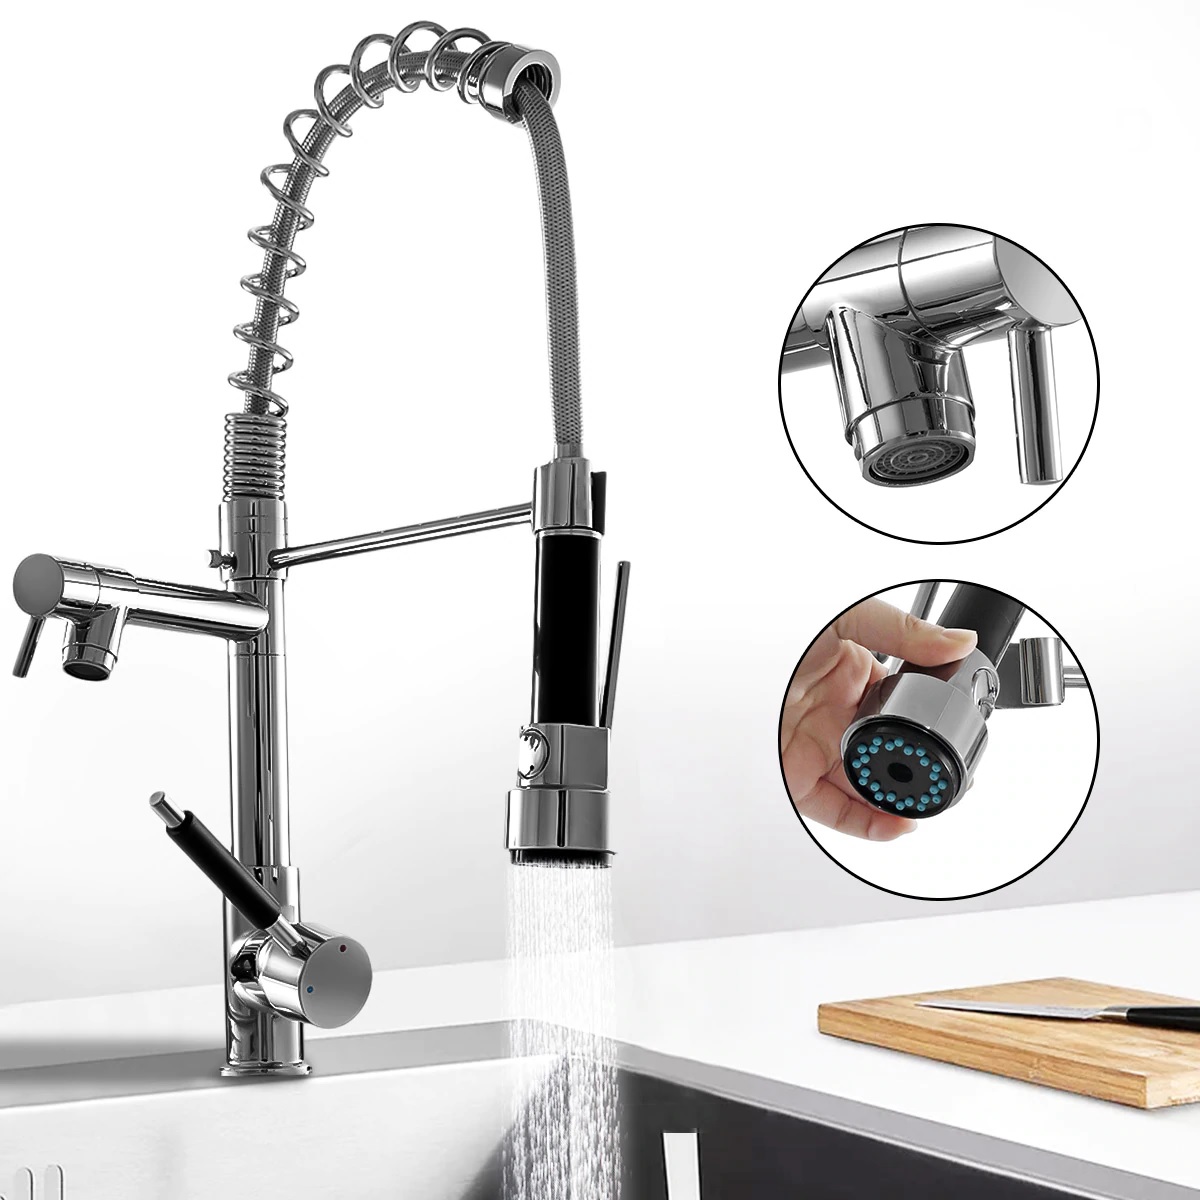 Juno Chrome Finish Kitchen Sink Faucet Pull-out Swivel Spout Hand Sprayer with Hot & Cold Water Mixer